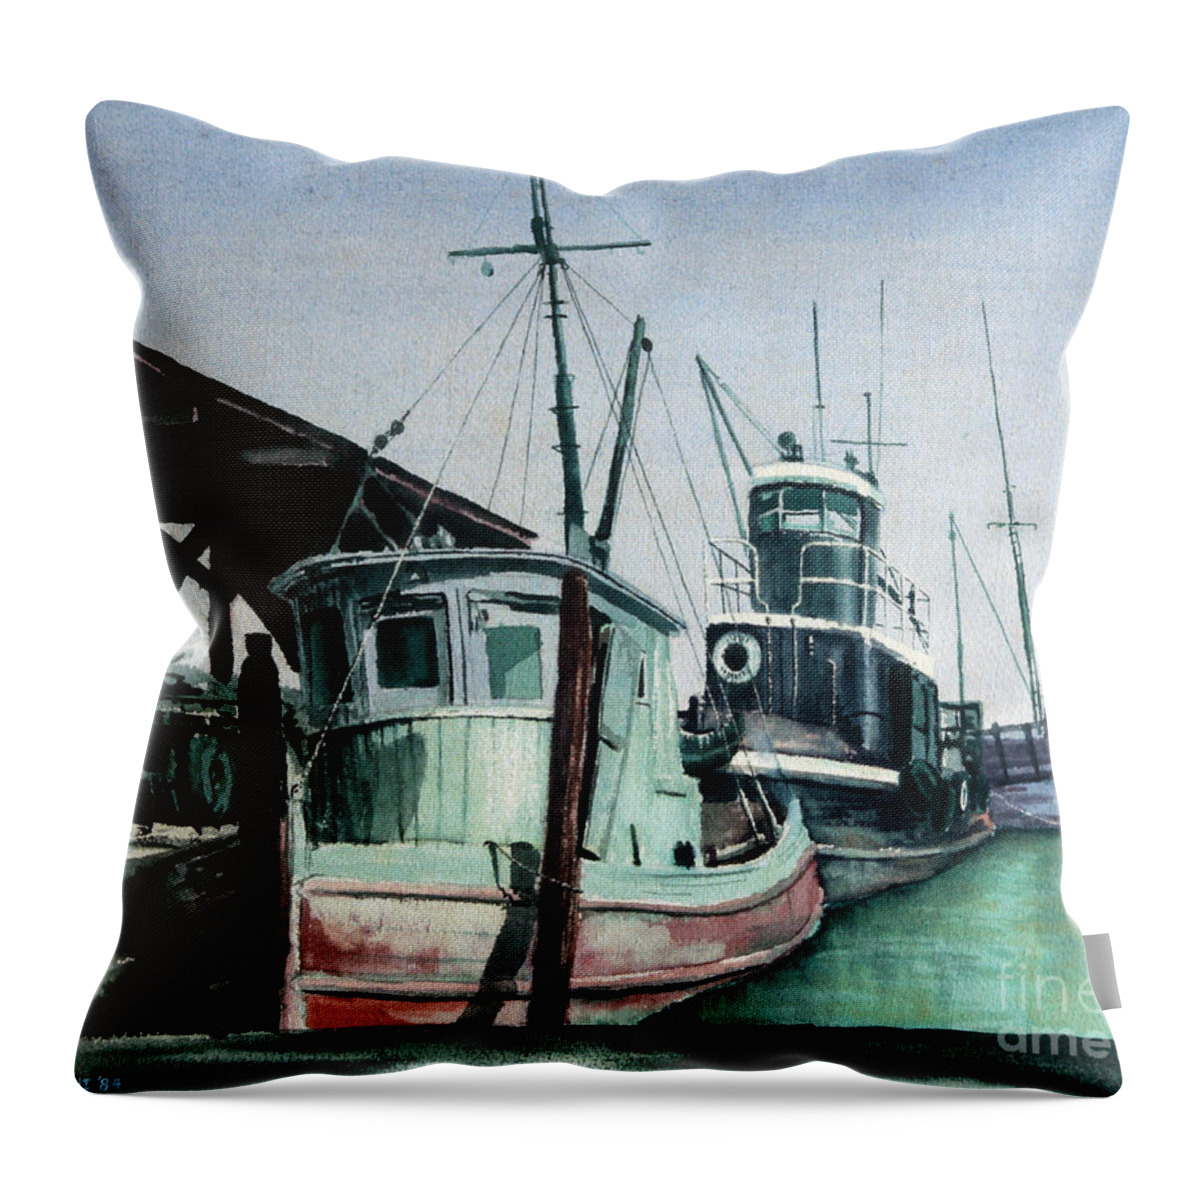 Boats Throw Pillow featuring the painting Boats by Joey Agbayani